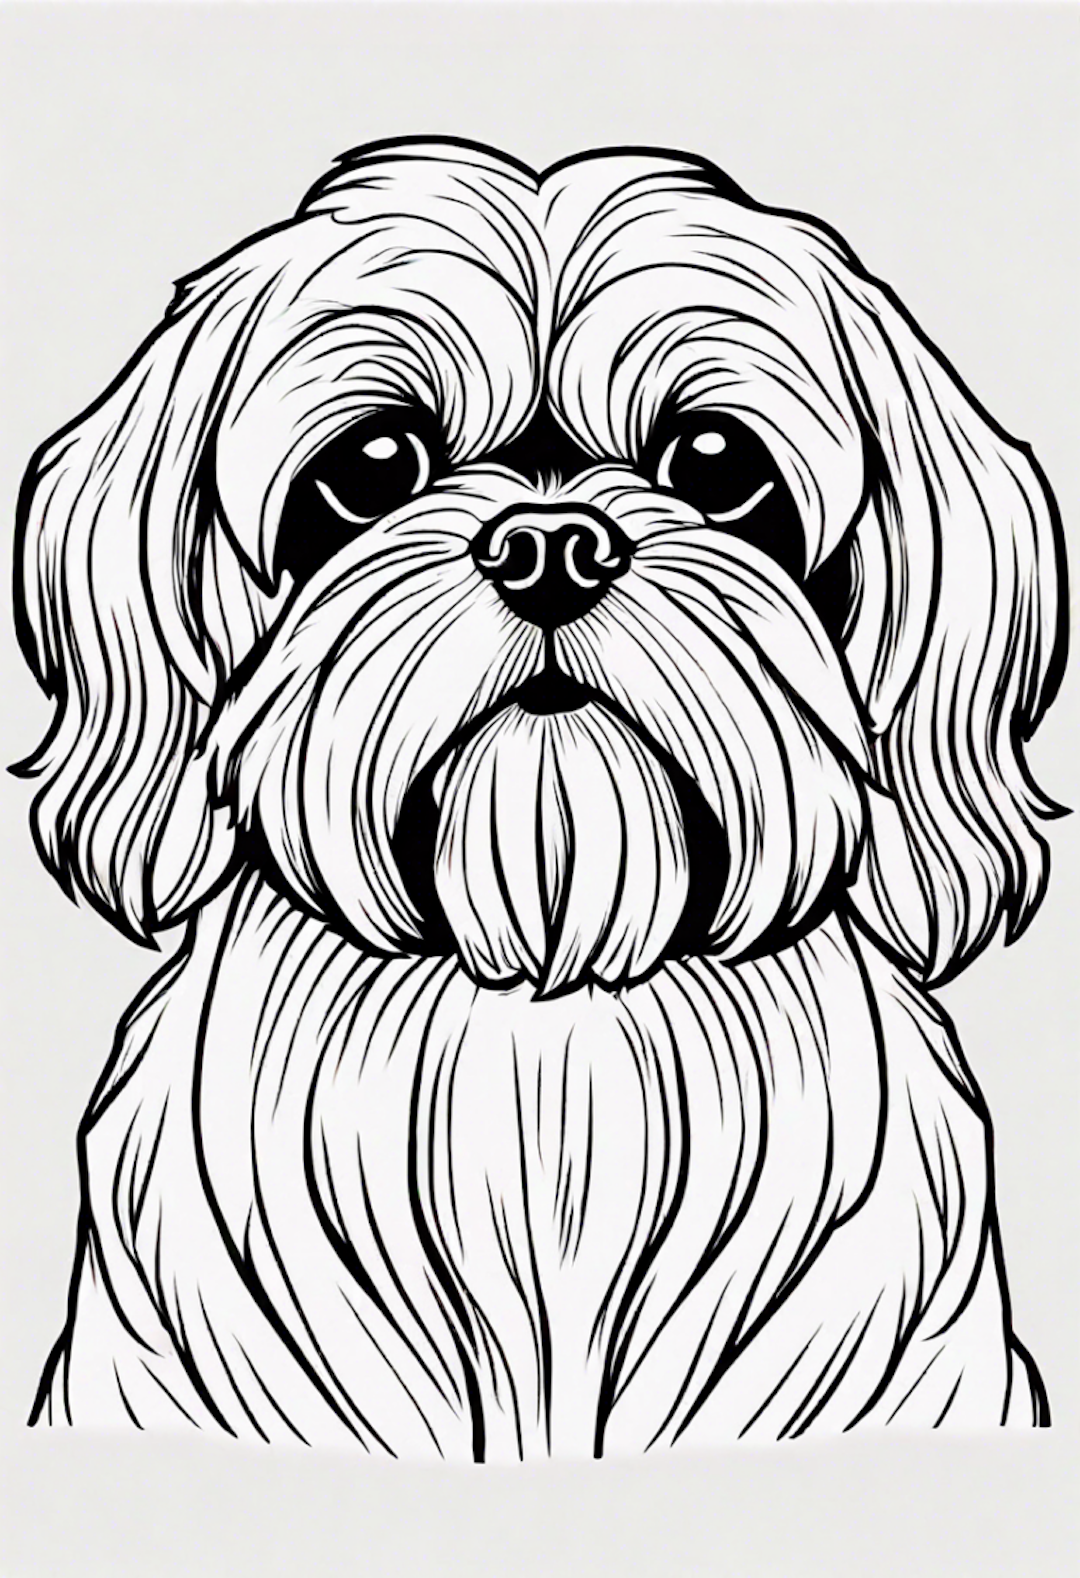 Adorable Shih Tzu Puppy Coloring Page coloring pages